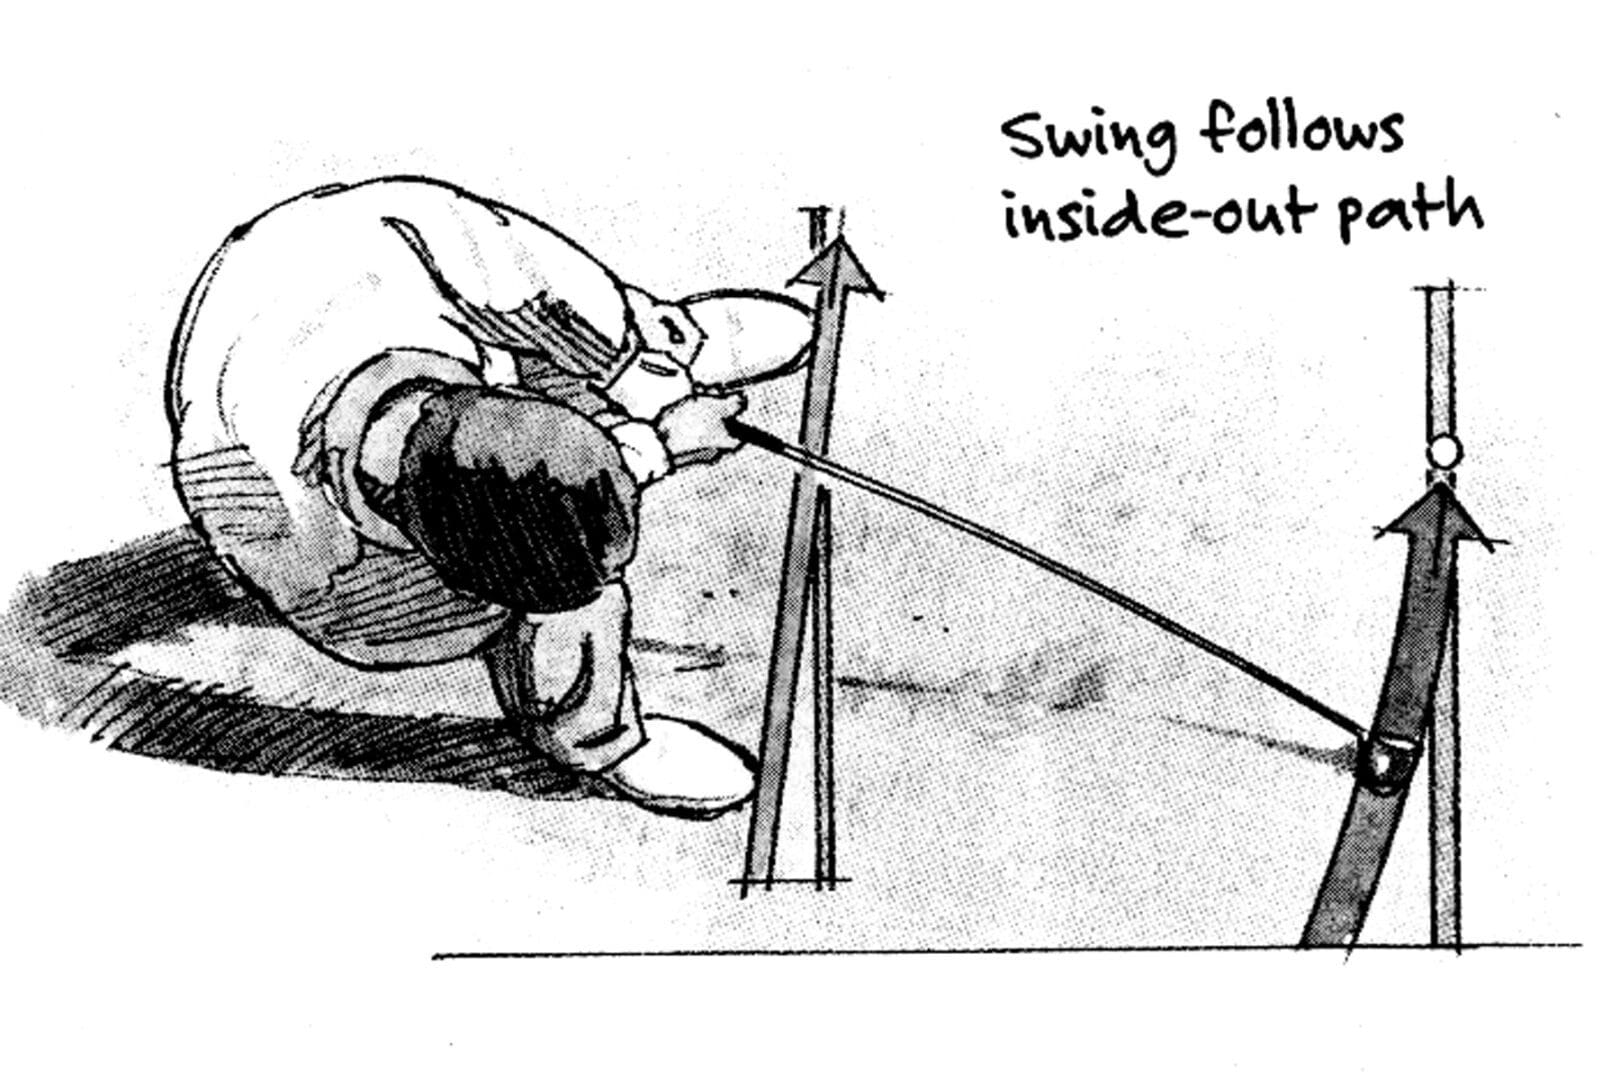 A drawing of a person swinging a pole